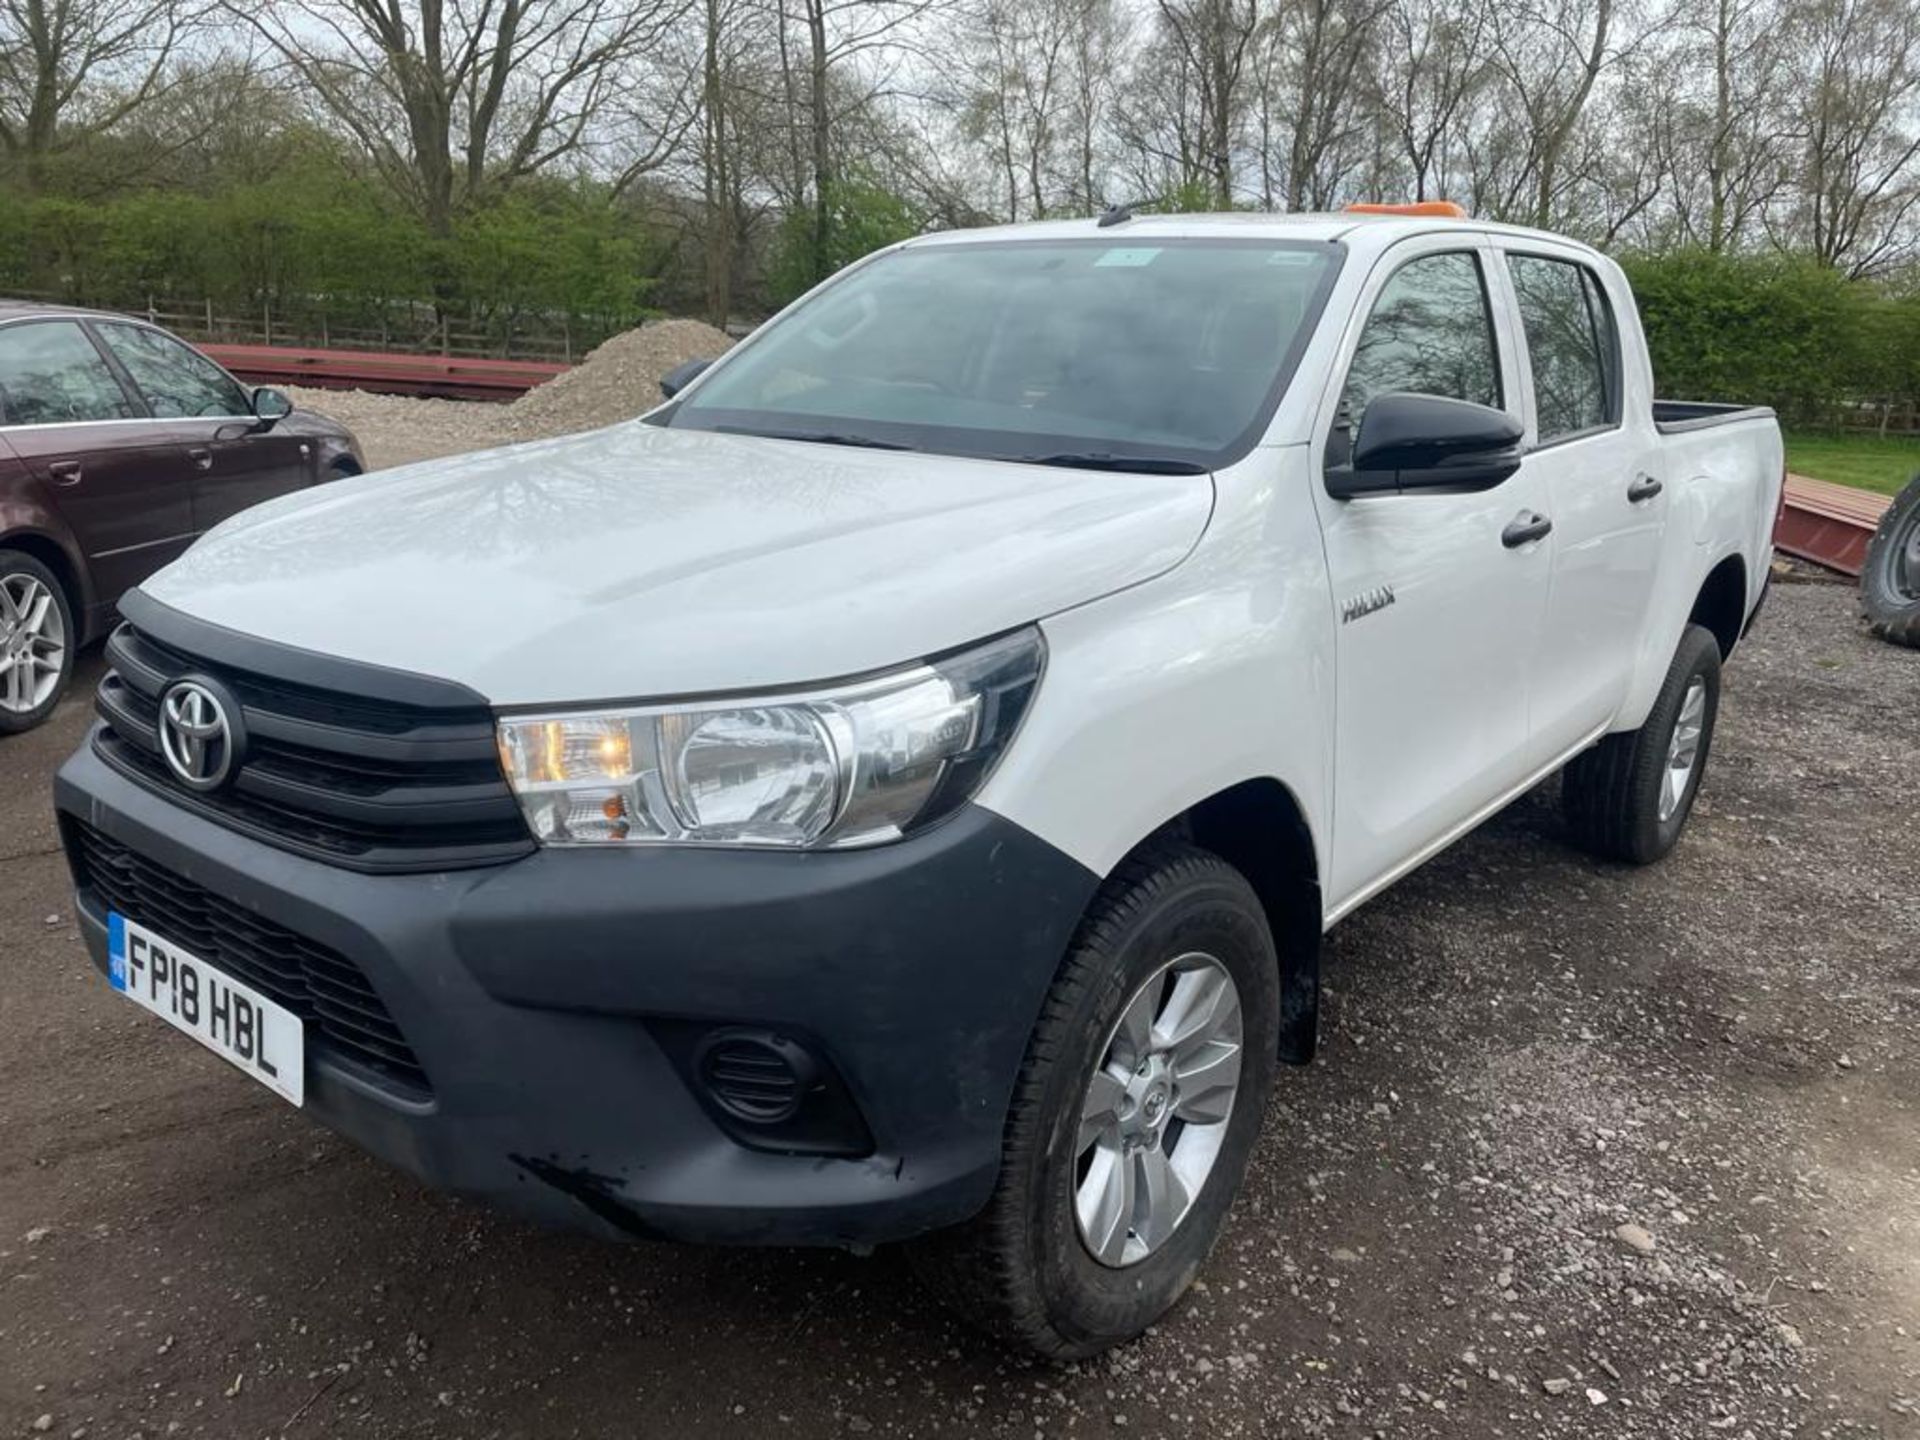 2018/18 REG TOYOTA HILUX ACTIVE D-4D 4WD DCB 2.4 DIESEL WHITE 4X4, SHOWING 1 FORMER KEEPER *PLUS VAT - Image 3 of 13